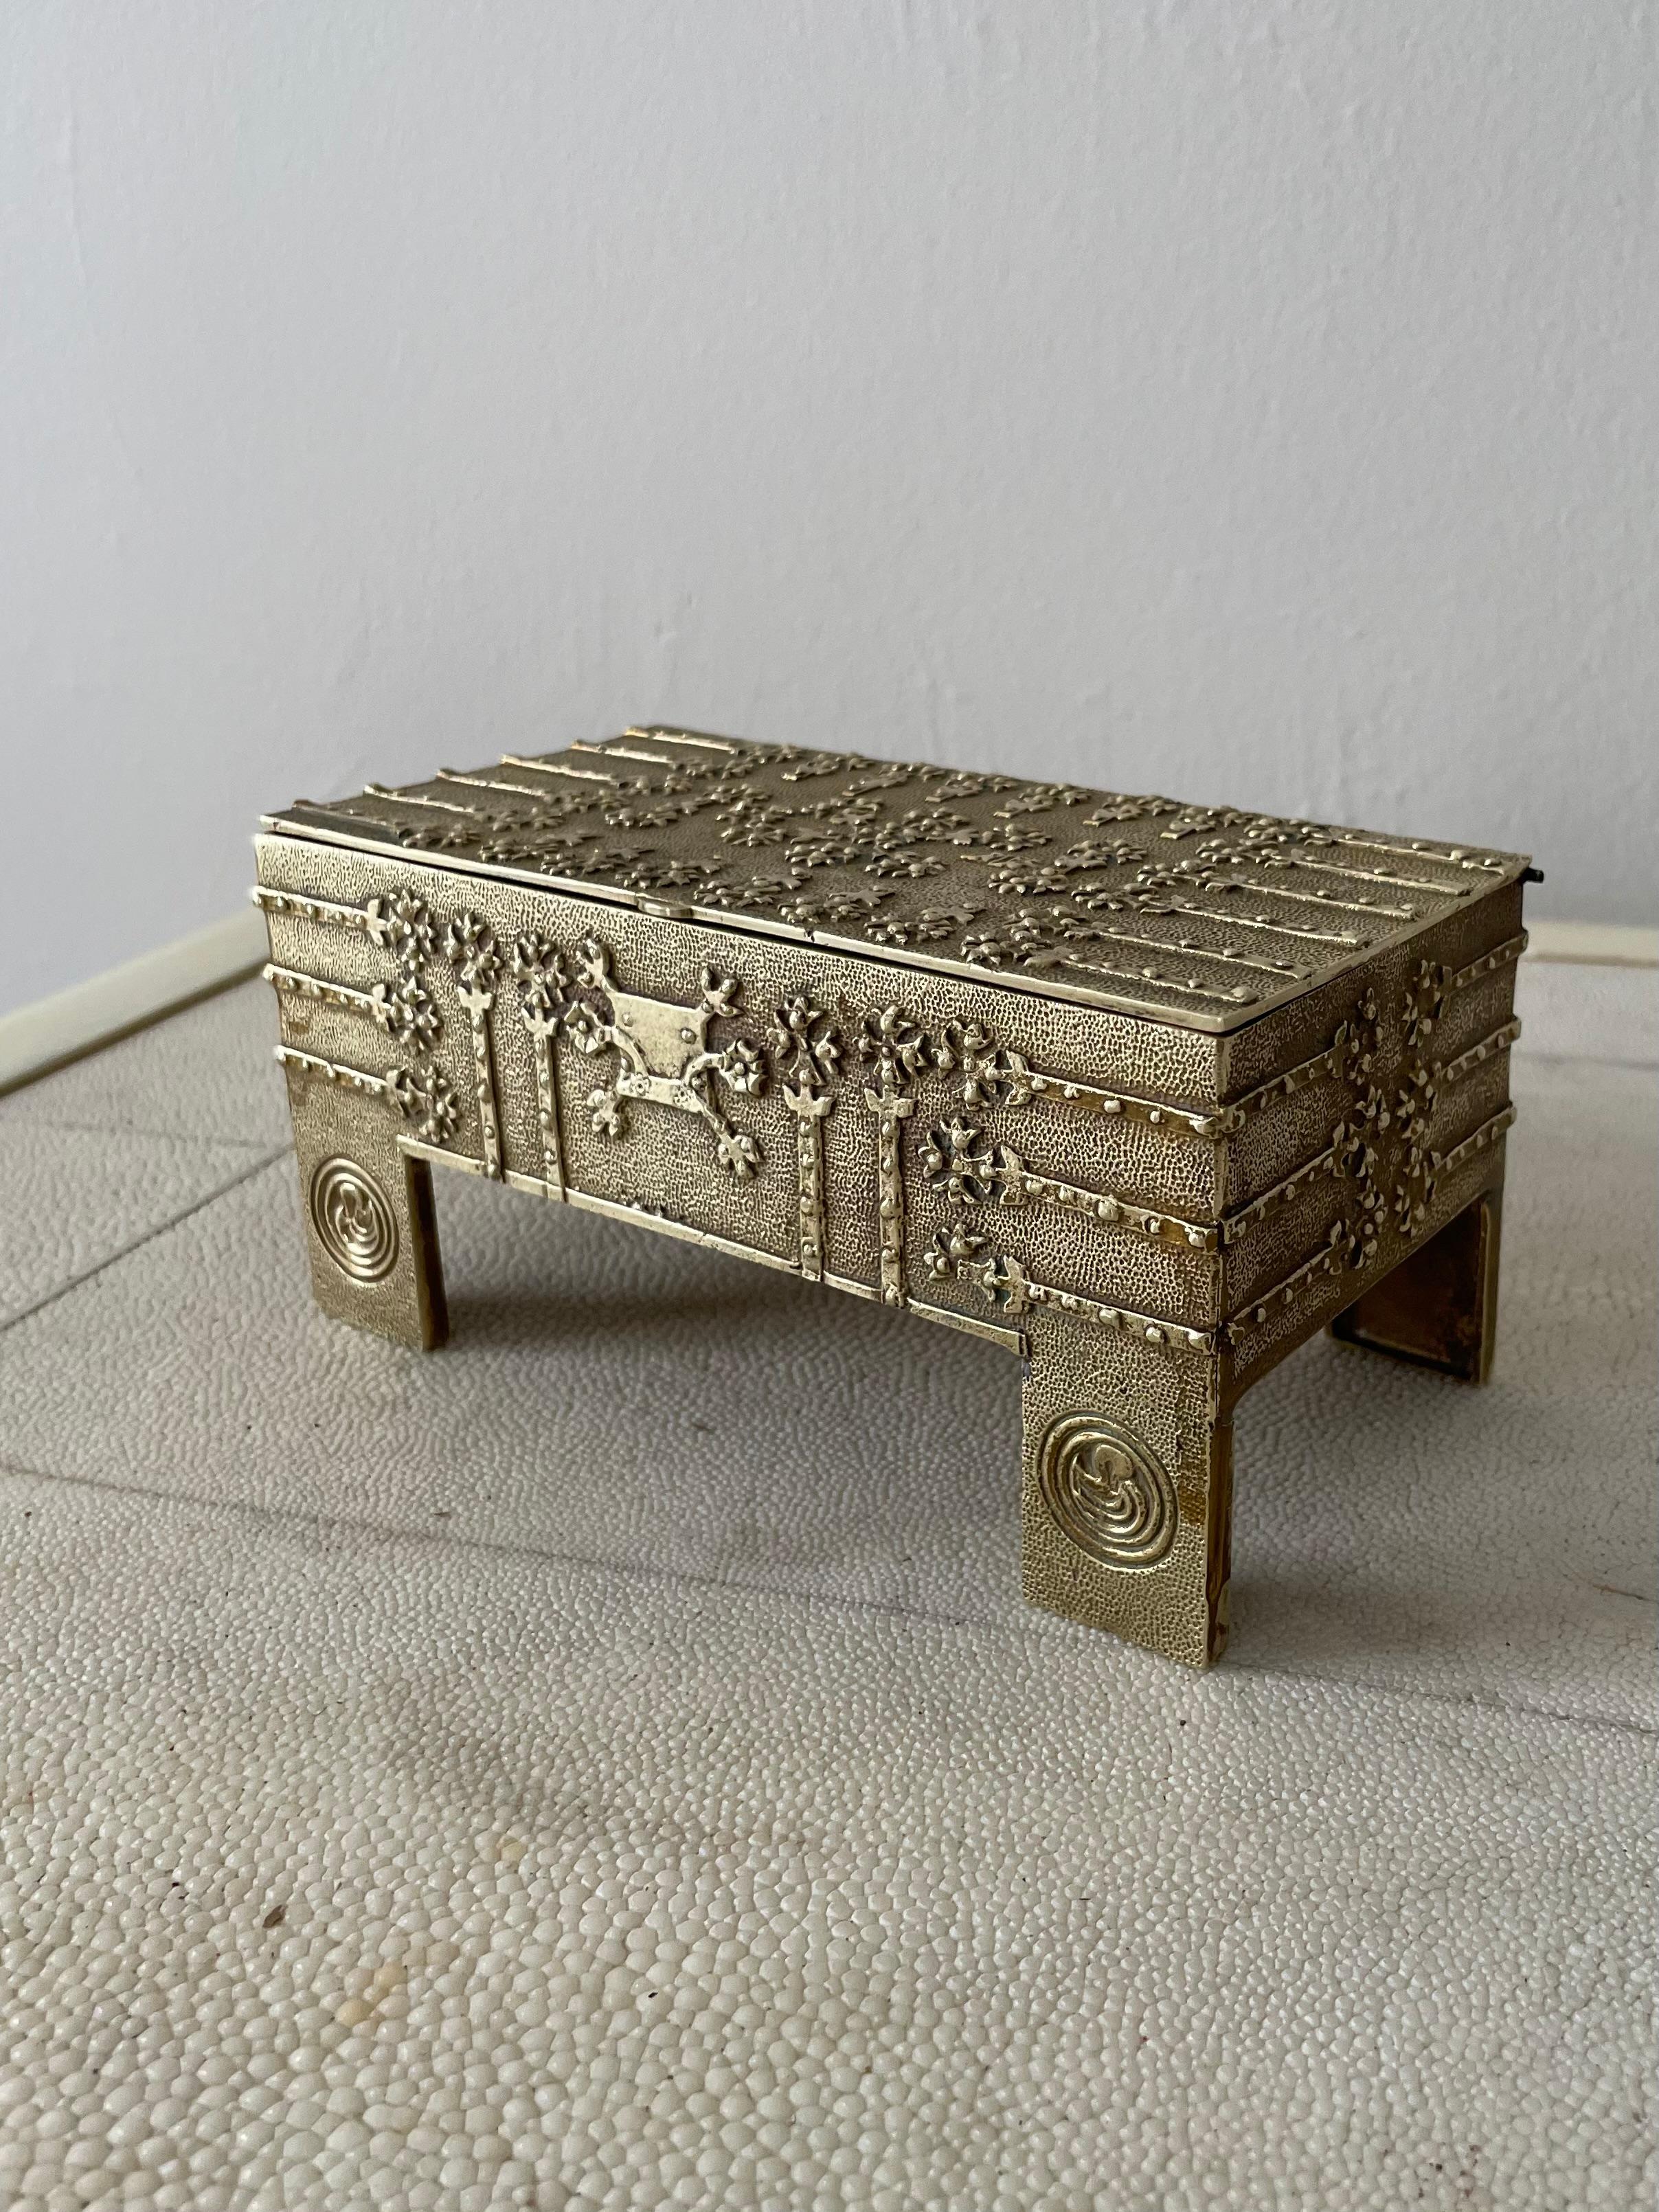 20th Century Brutalist Hammered Brass Box or Jewelry Casket For Sale